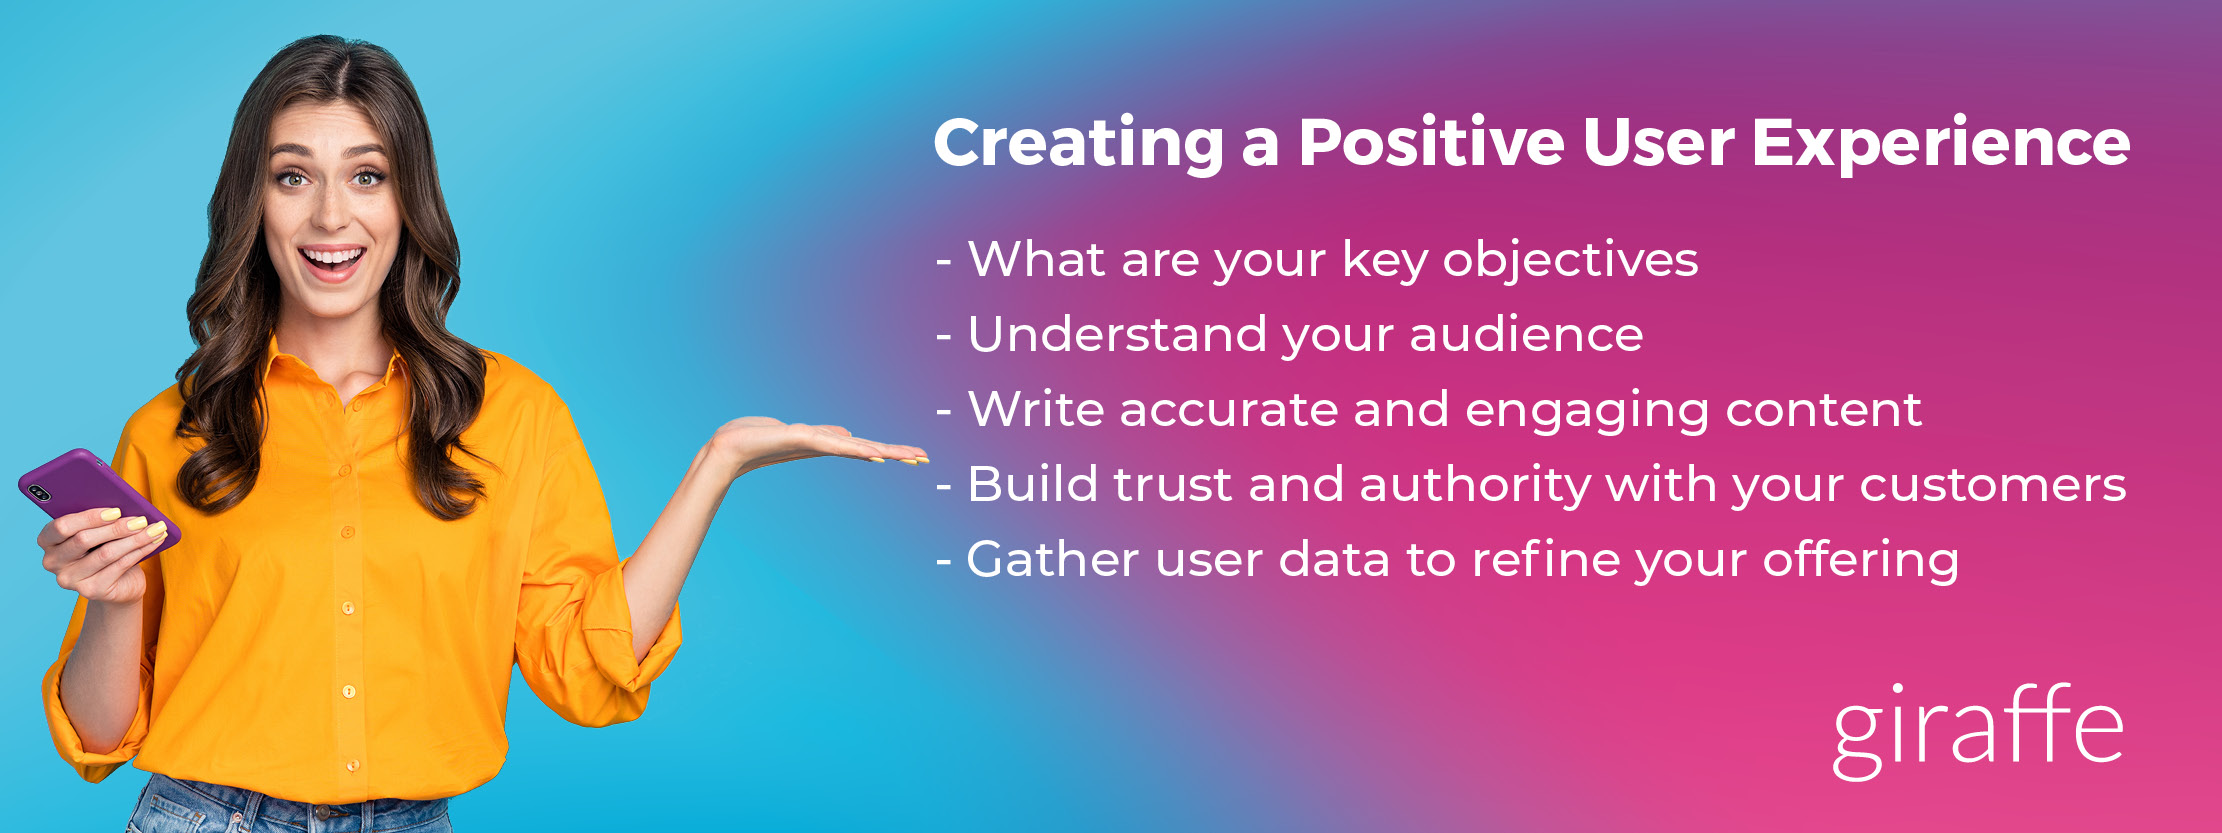 creating a positive user experience